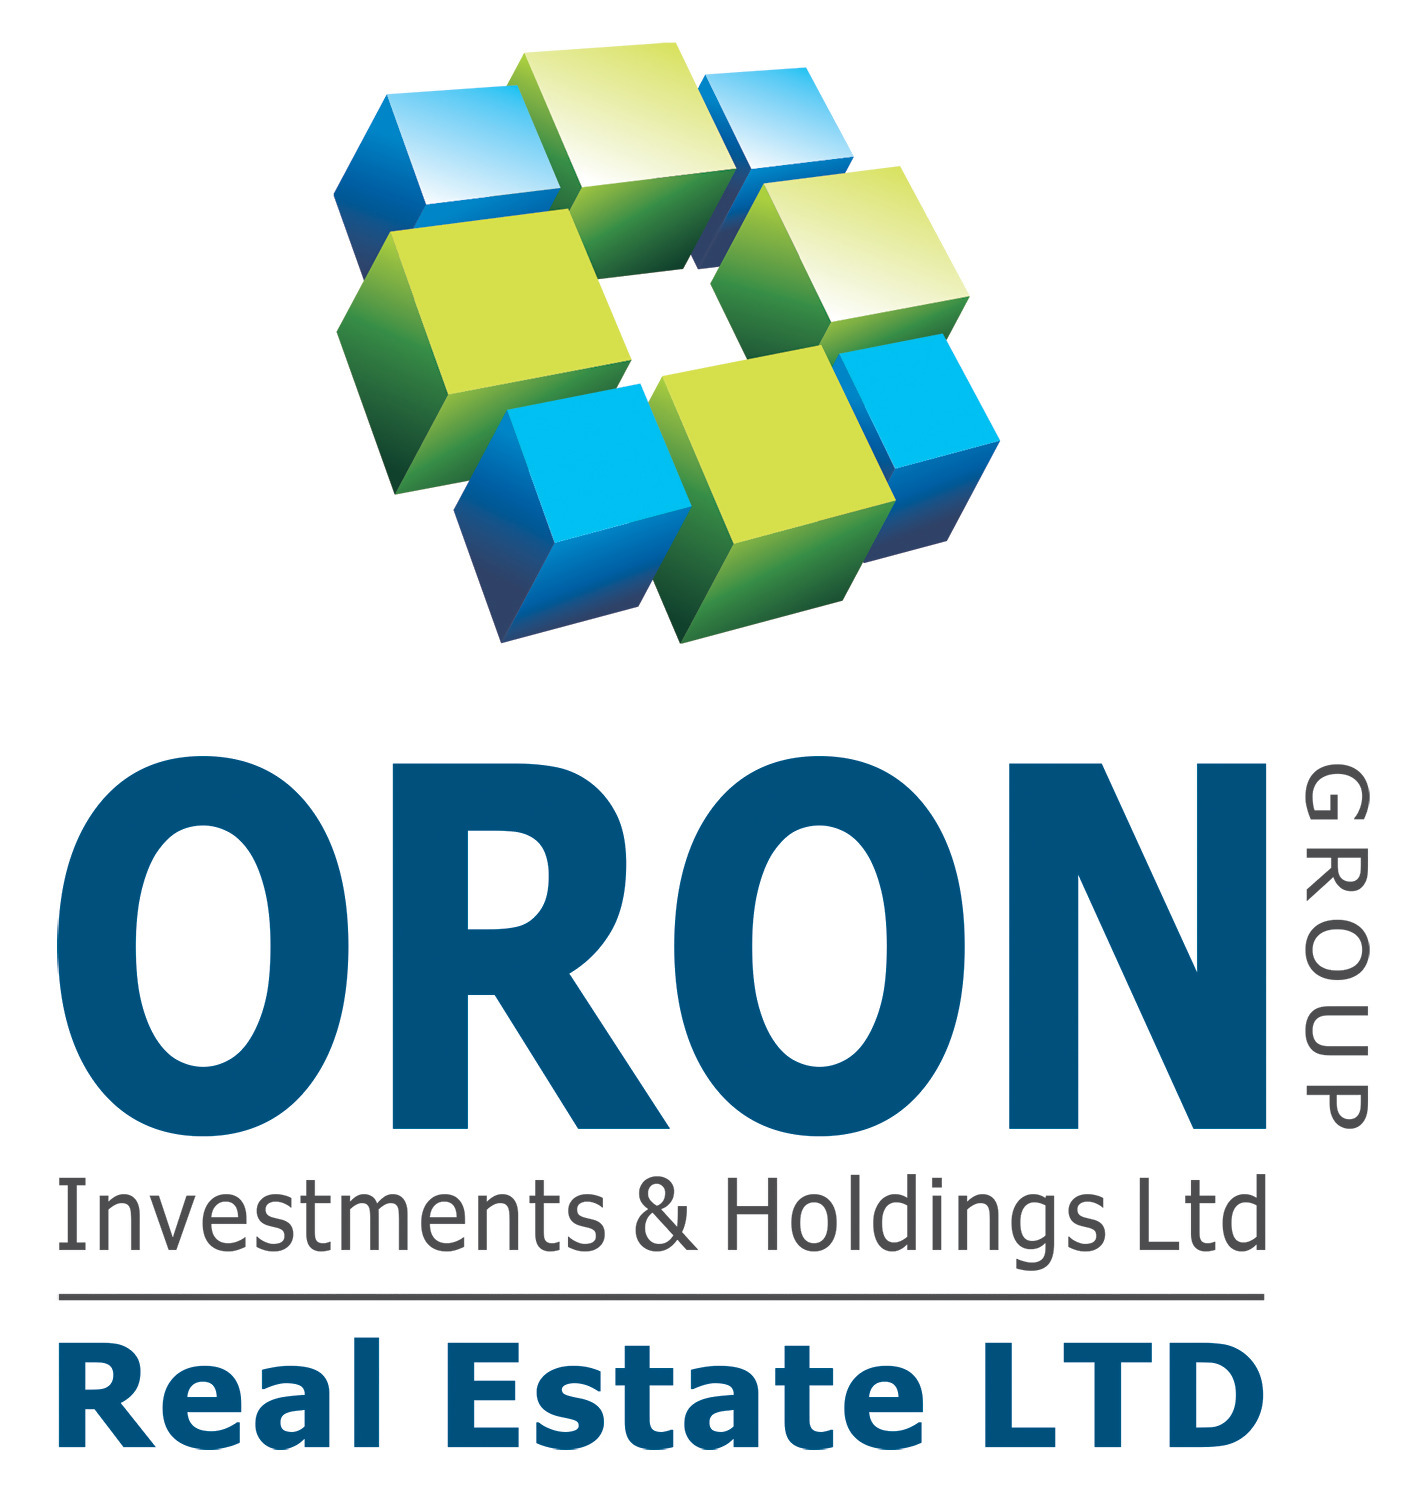 Oron Real Estate Part of the Oron Holdings and Investments Group Ltd.